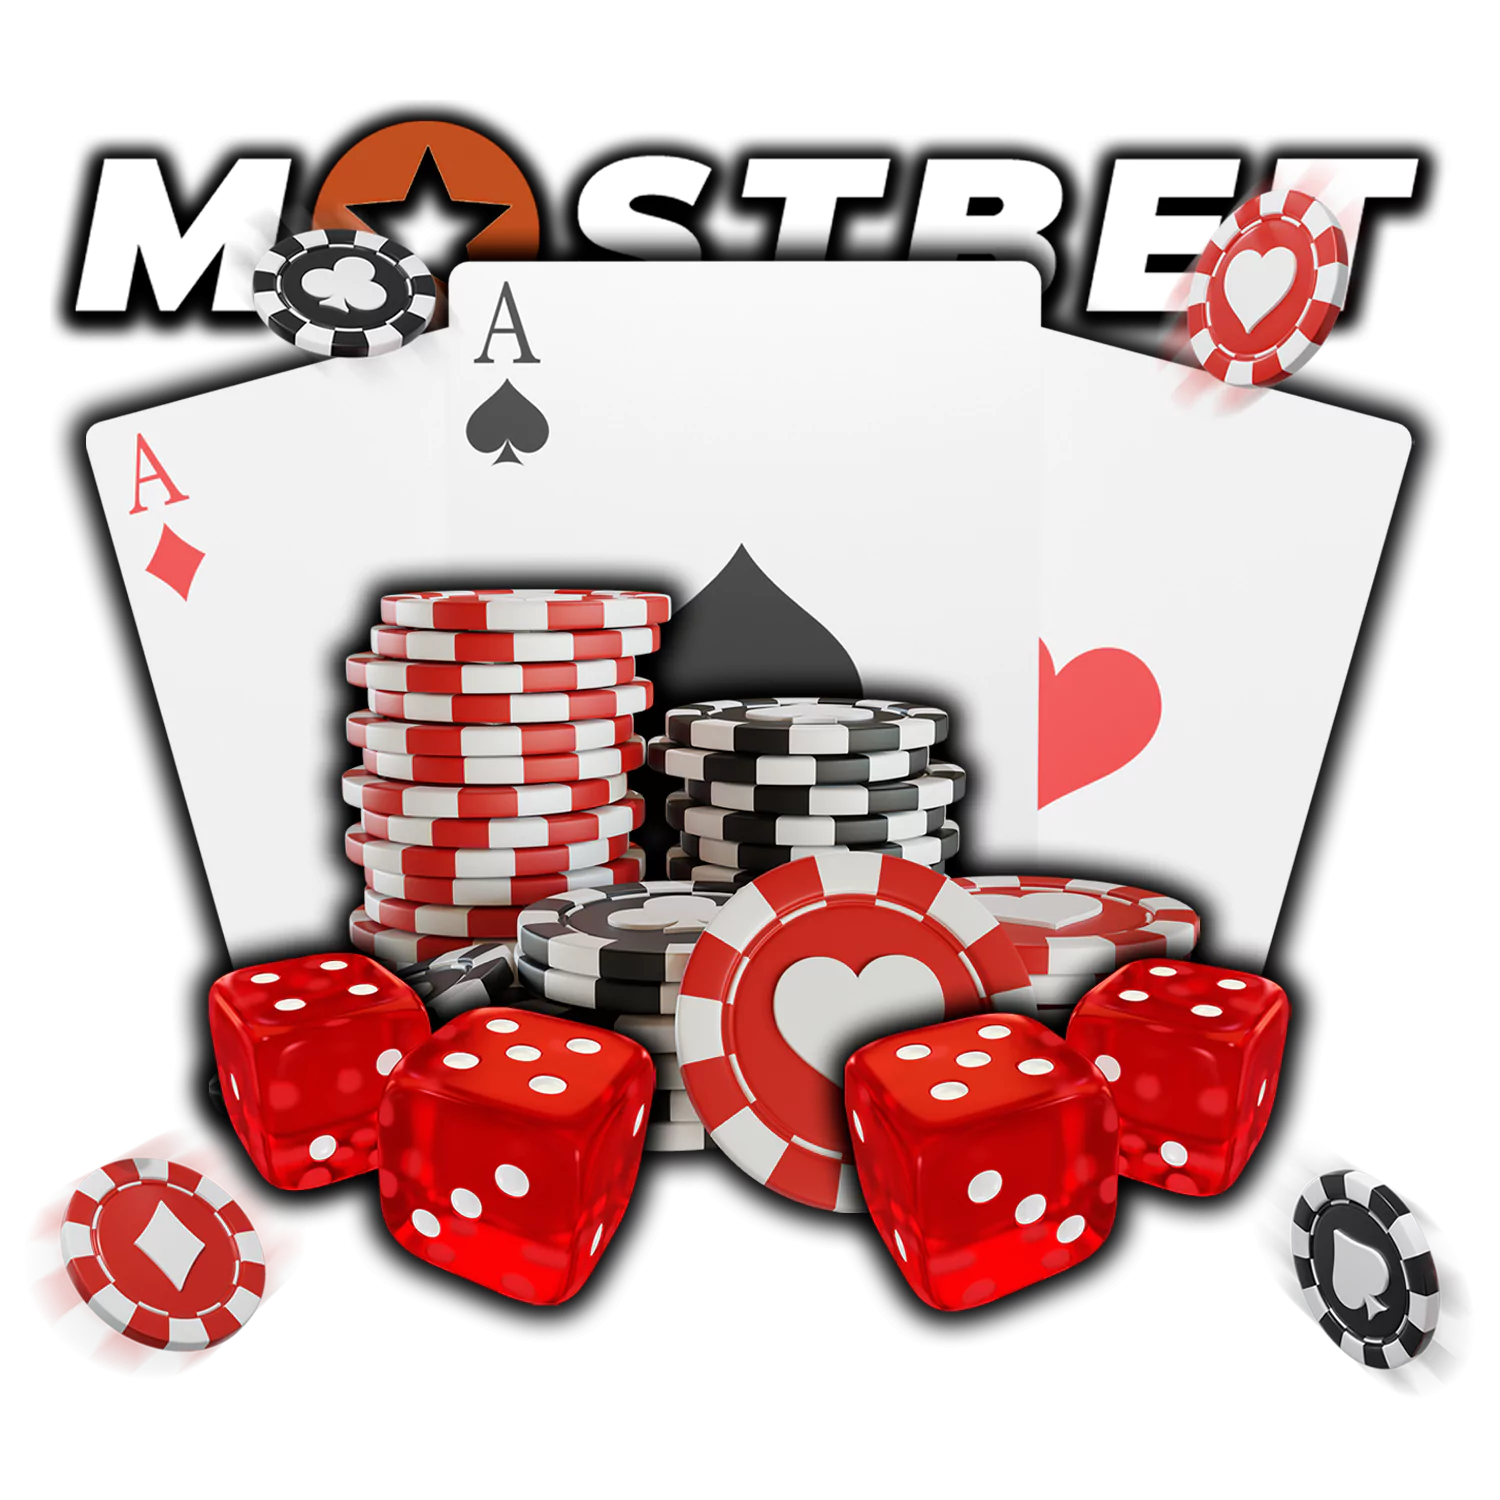 Sign up and get a welcome bonus on poker games at Mostbet.